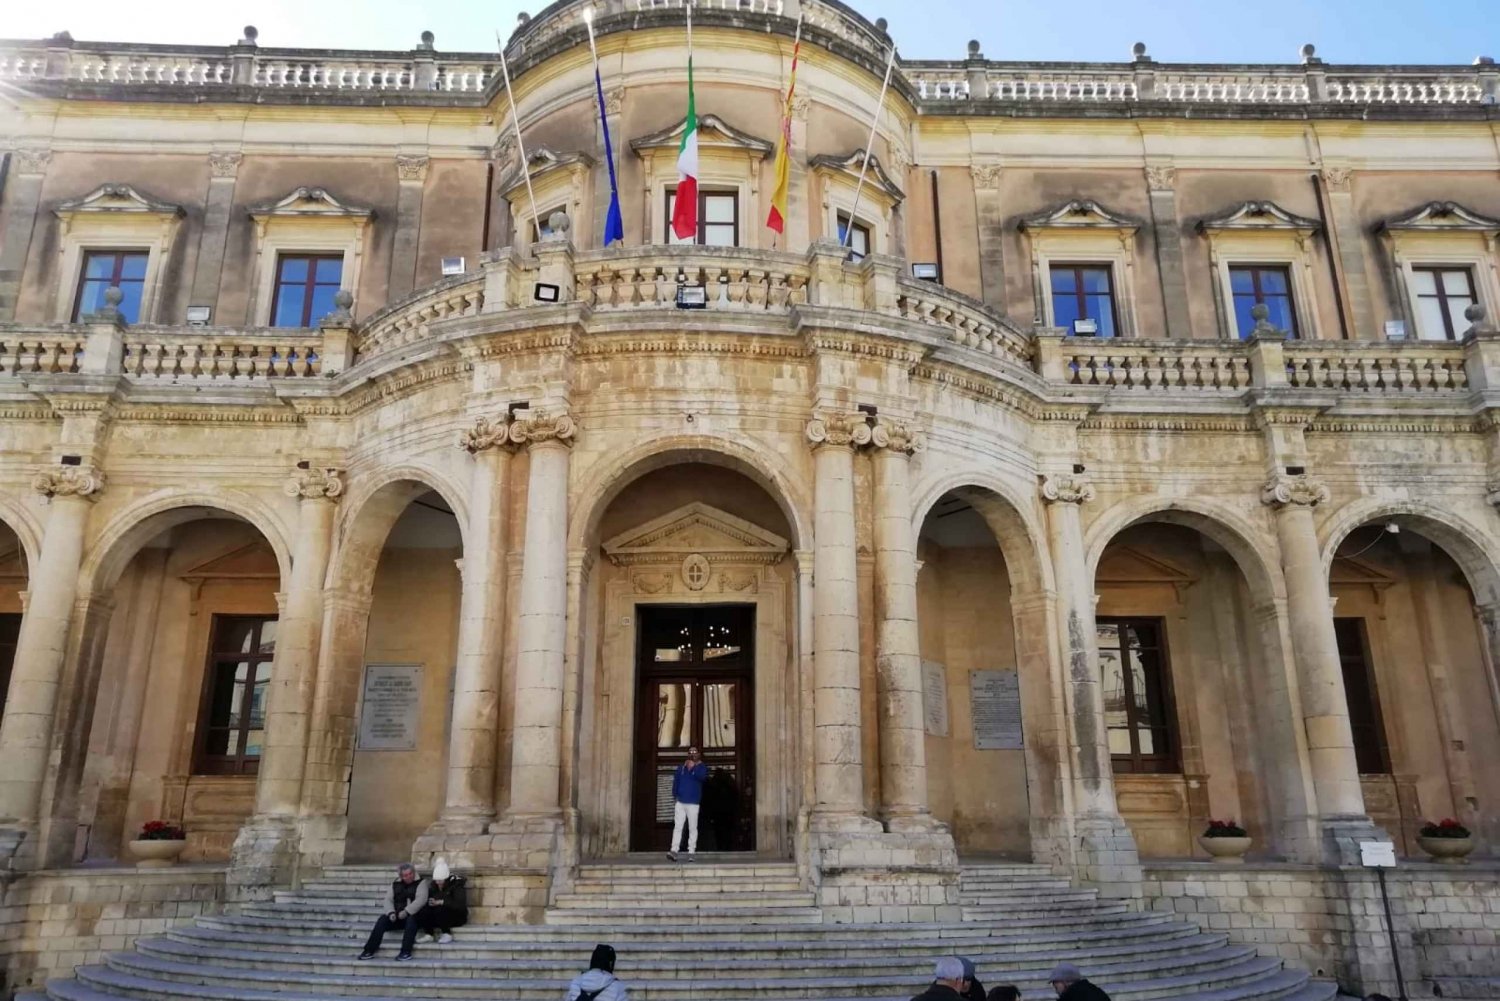 From Catania: Syracuse and Noto Culture and History Tour